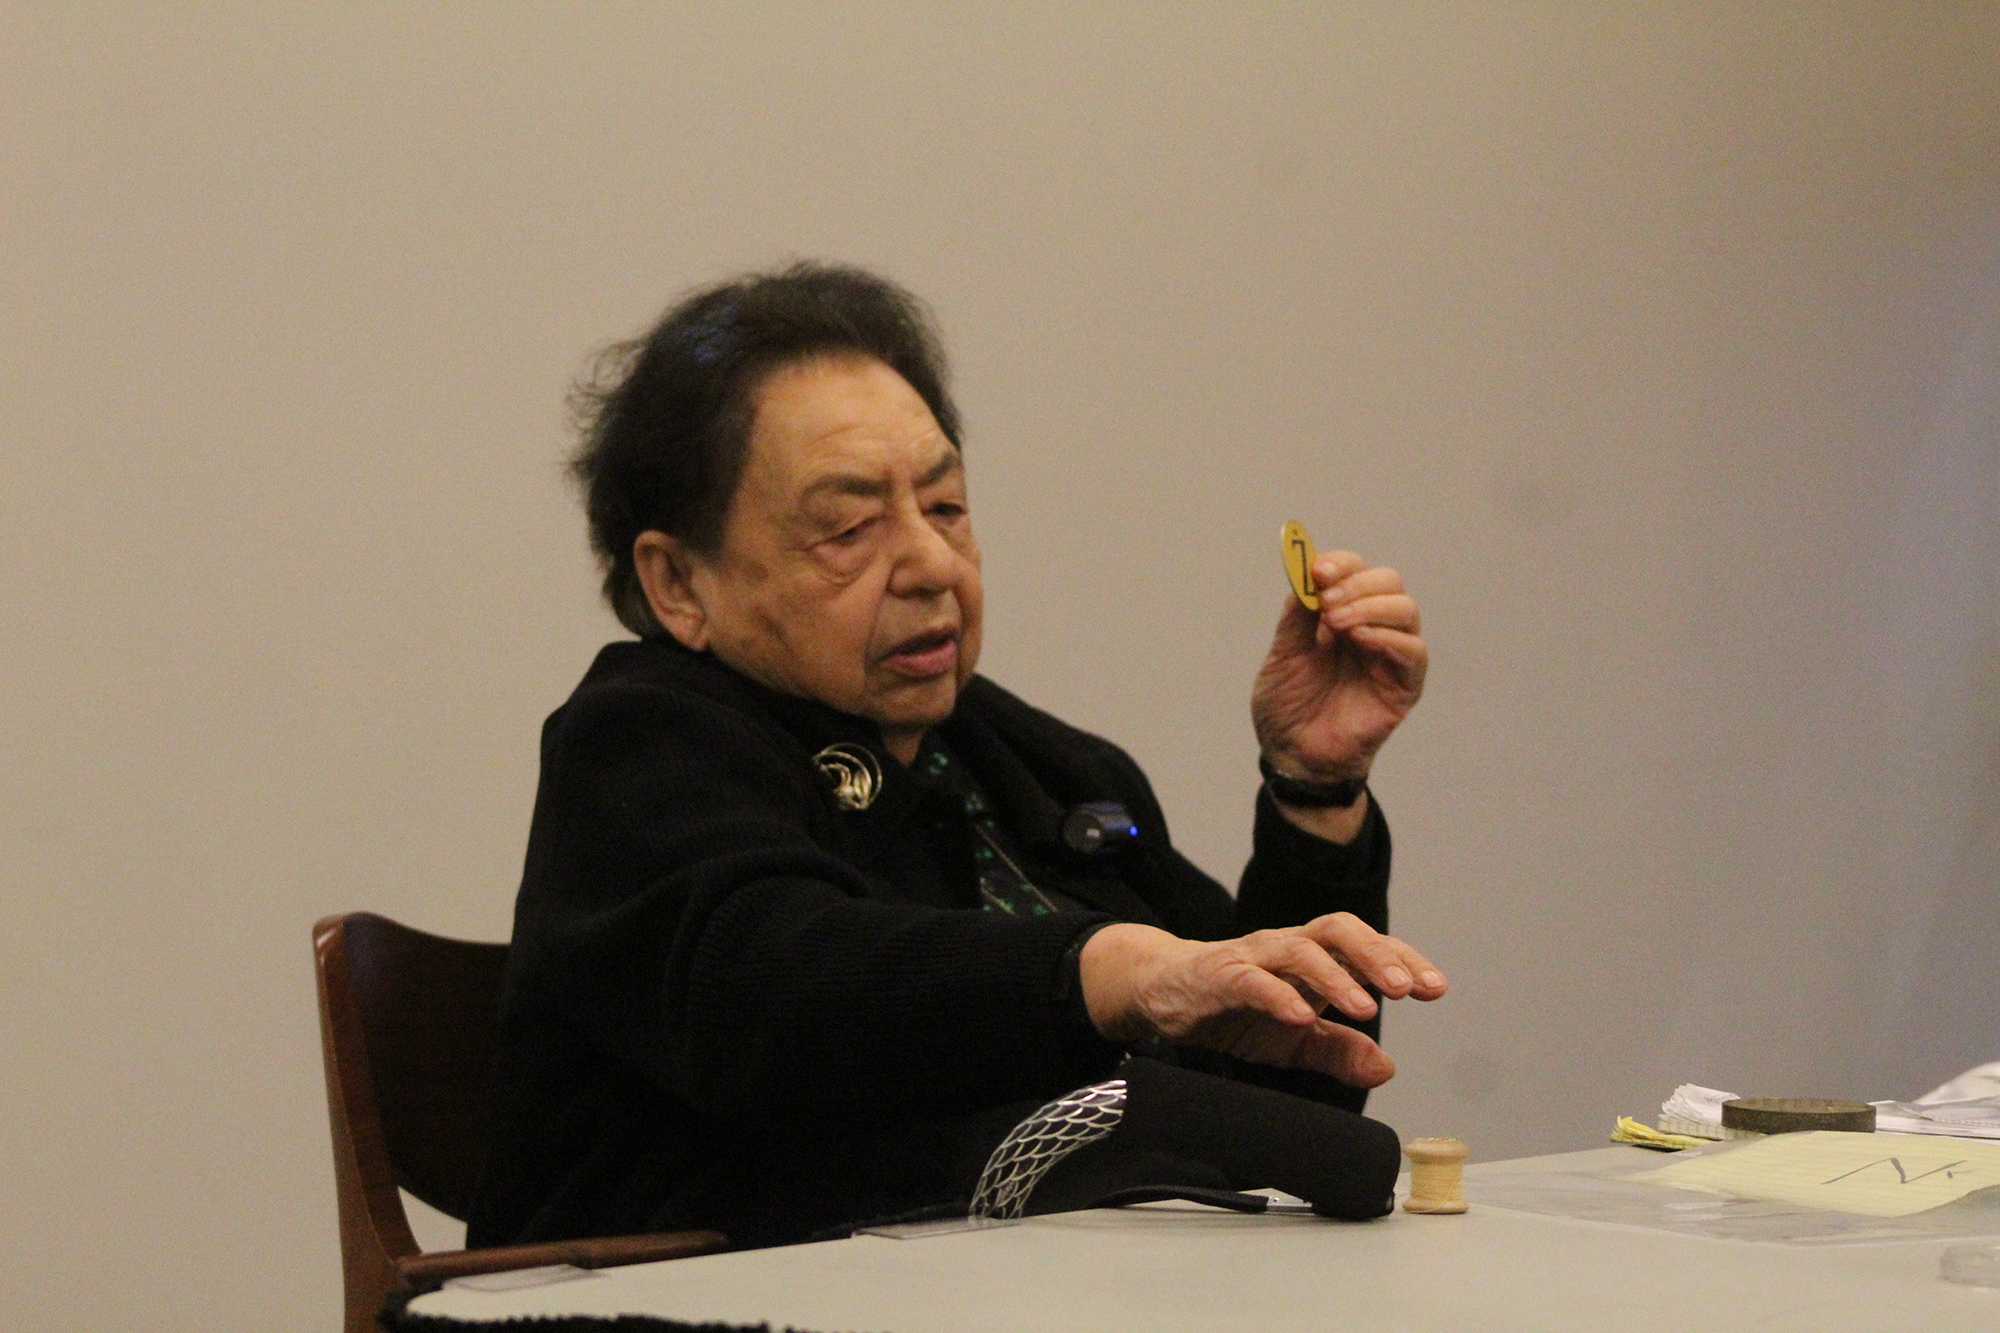 Port Jefferson resident who escaped the Holocaust shares her story